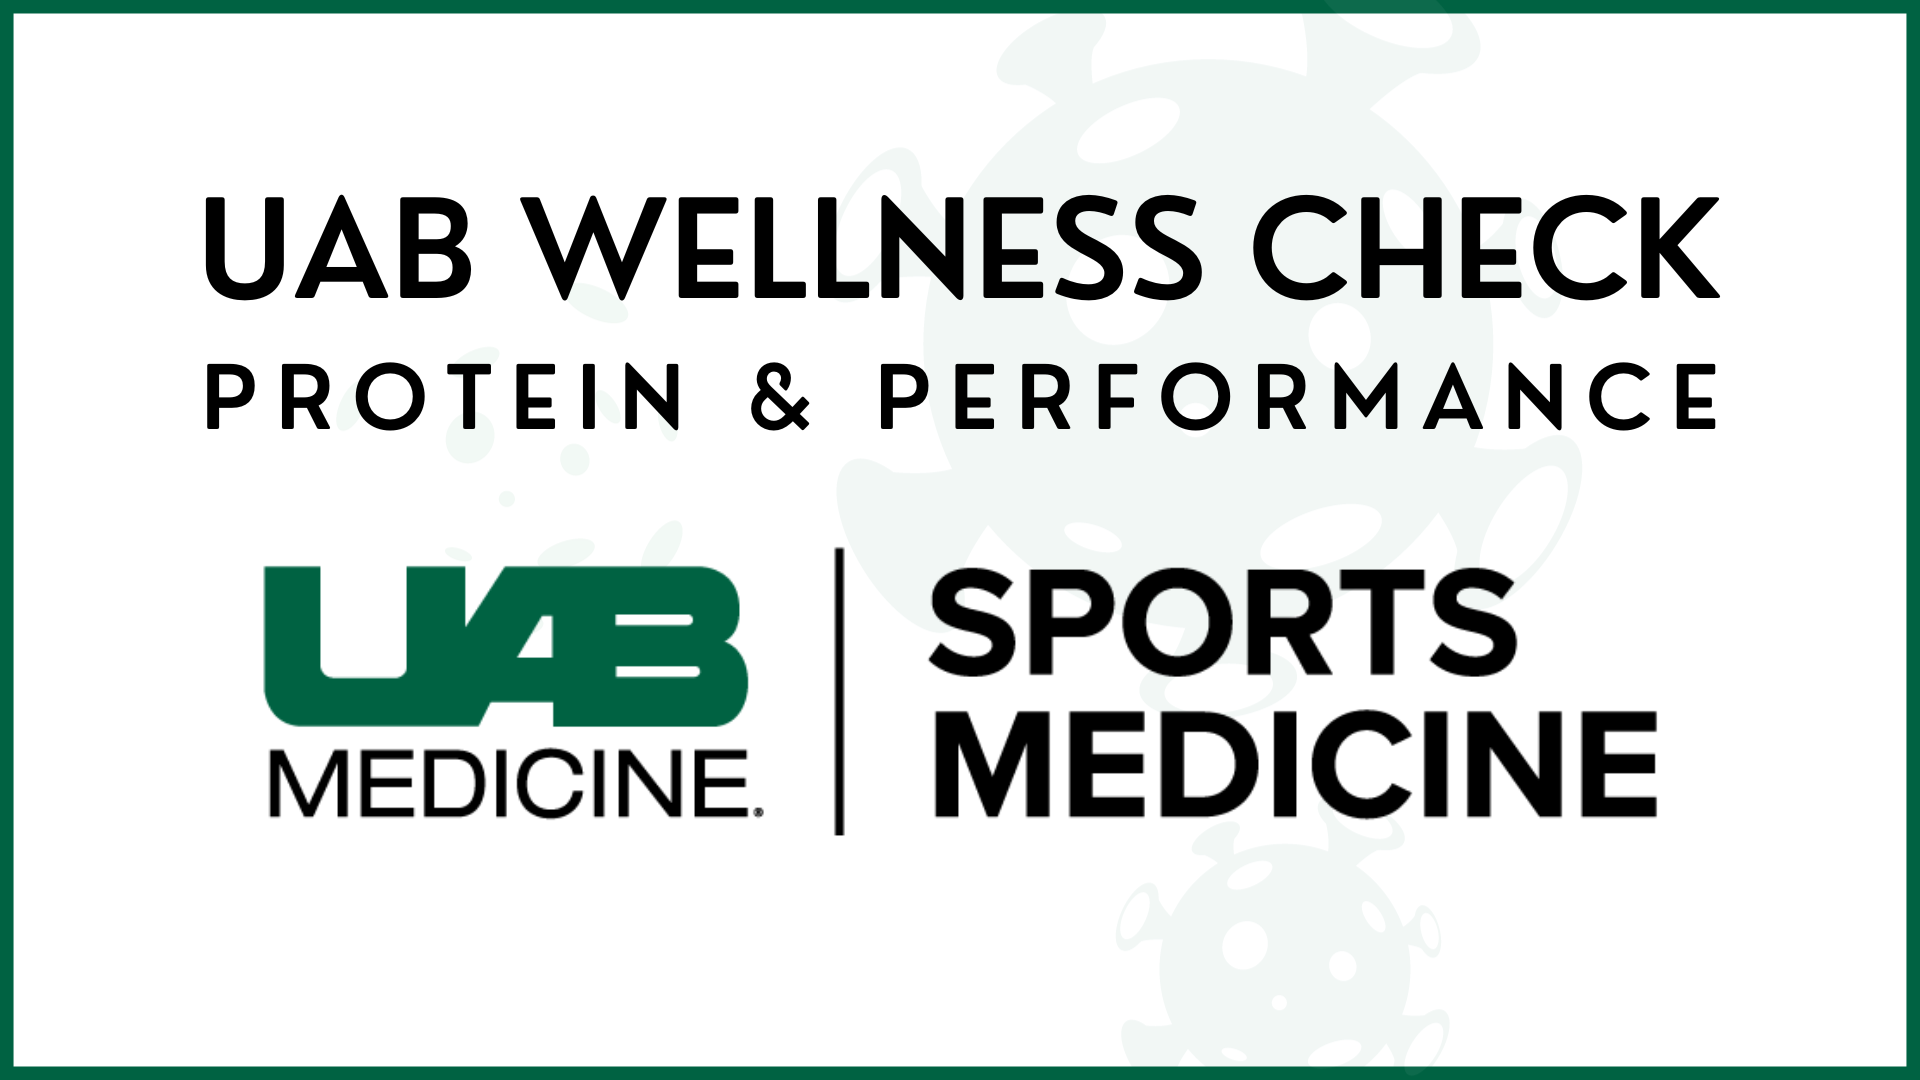 UAB Wellness Check - Protein and Performance